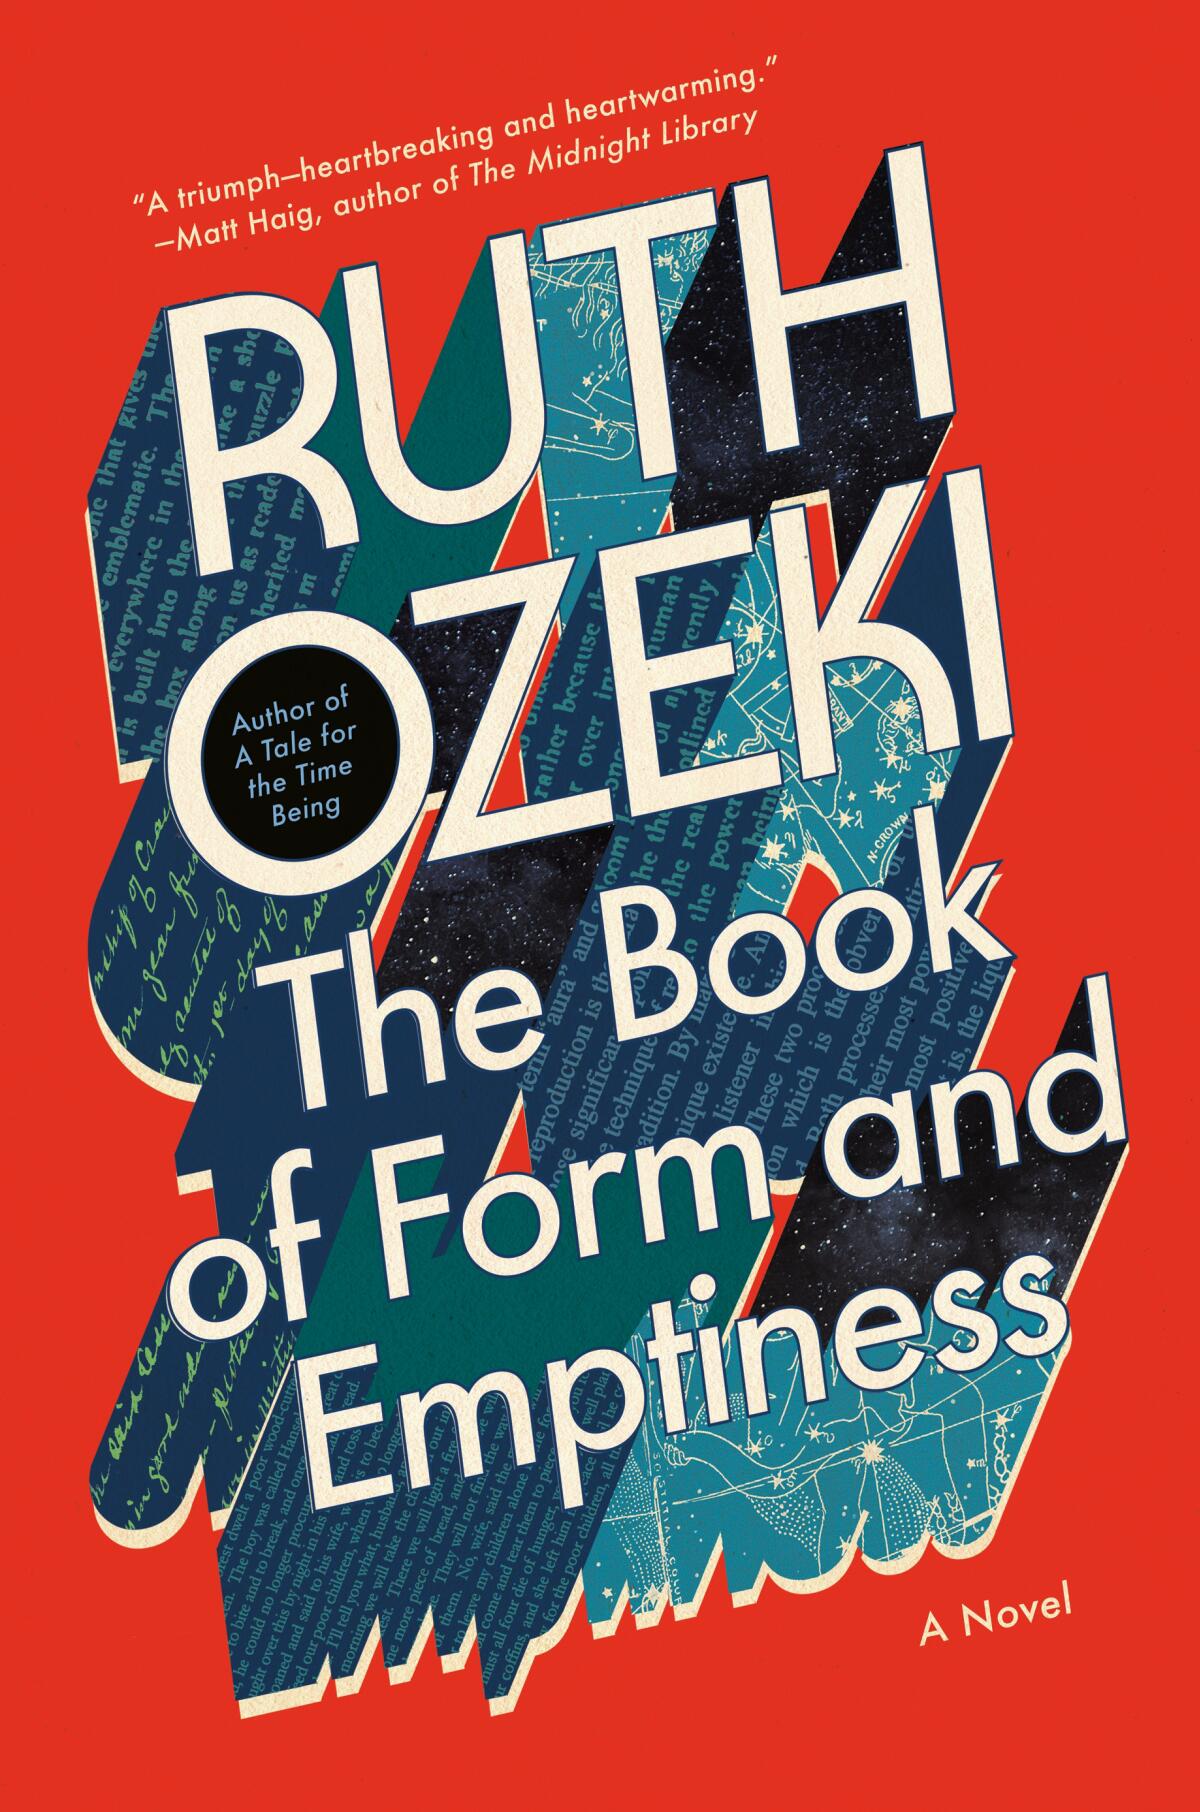 "The Book of Form and Emptiness," by Ruth Ozeki